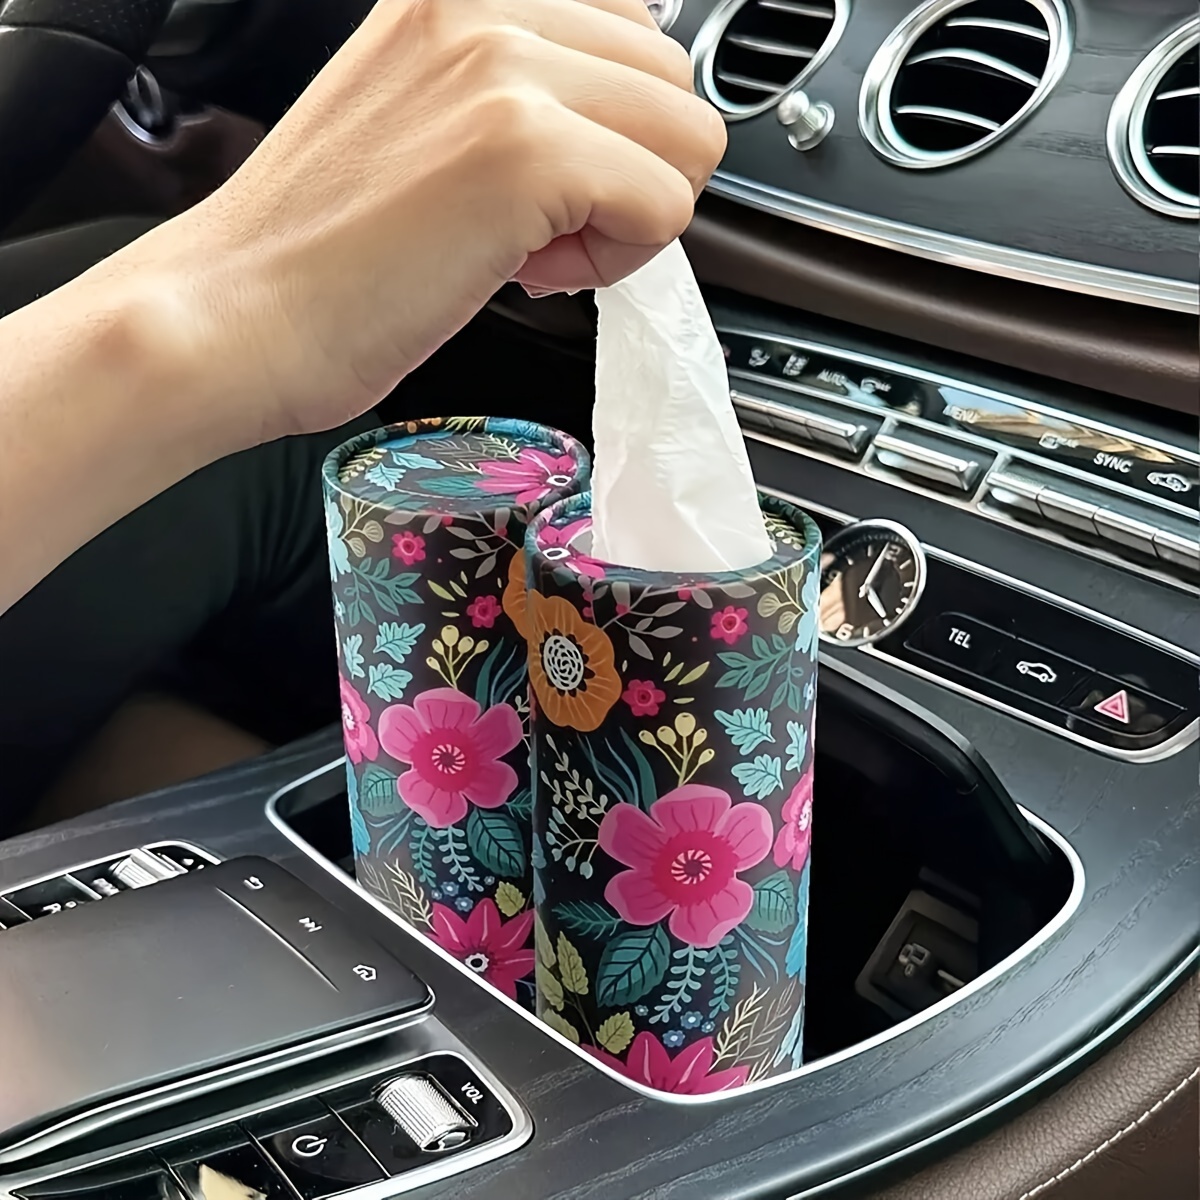 

1pc Floral Car Tissue Holder With 40 Paper Facial Tissues - Round Portable Cylinder Tube Tissue Case For Vehicle Cup Holder, Elegant Dispenser For Home & Travel